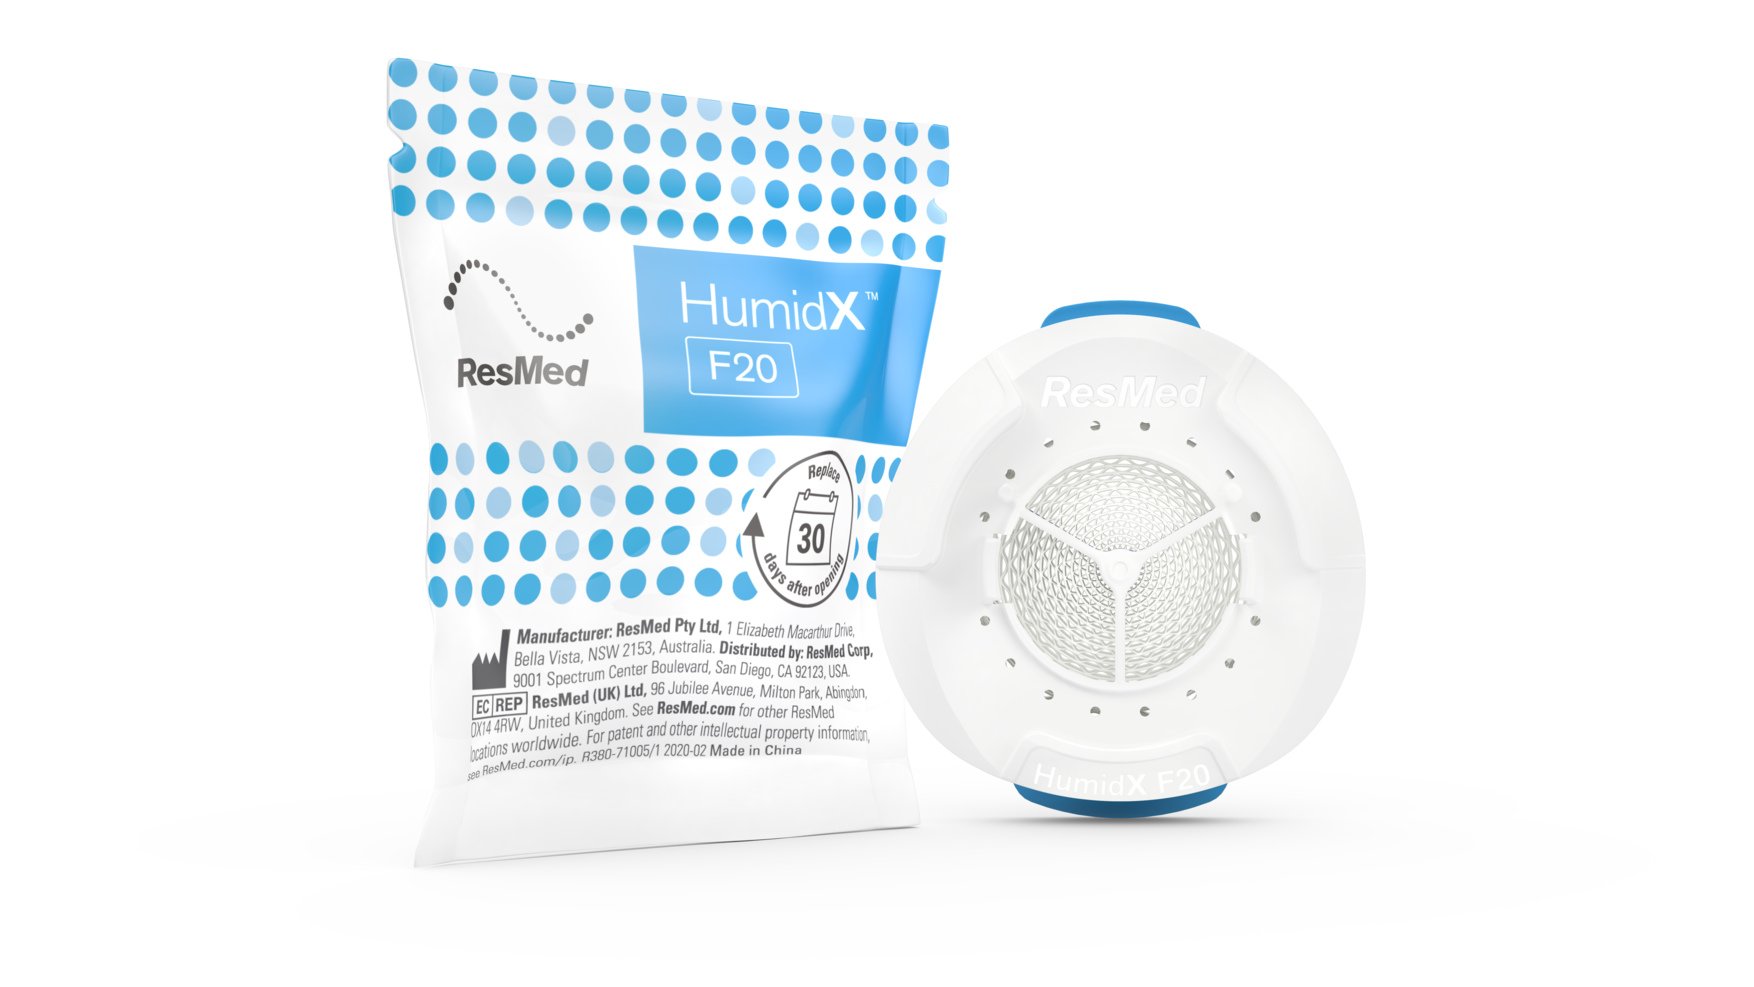 ResMed AirMini HumidX for F20 CPAP Machine